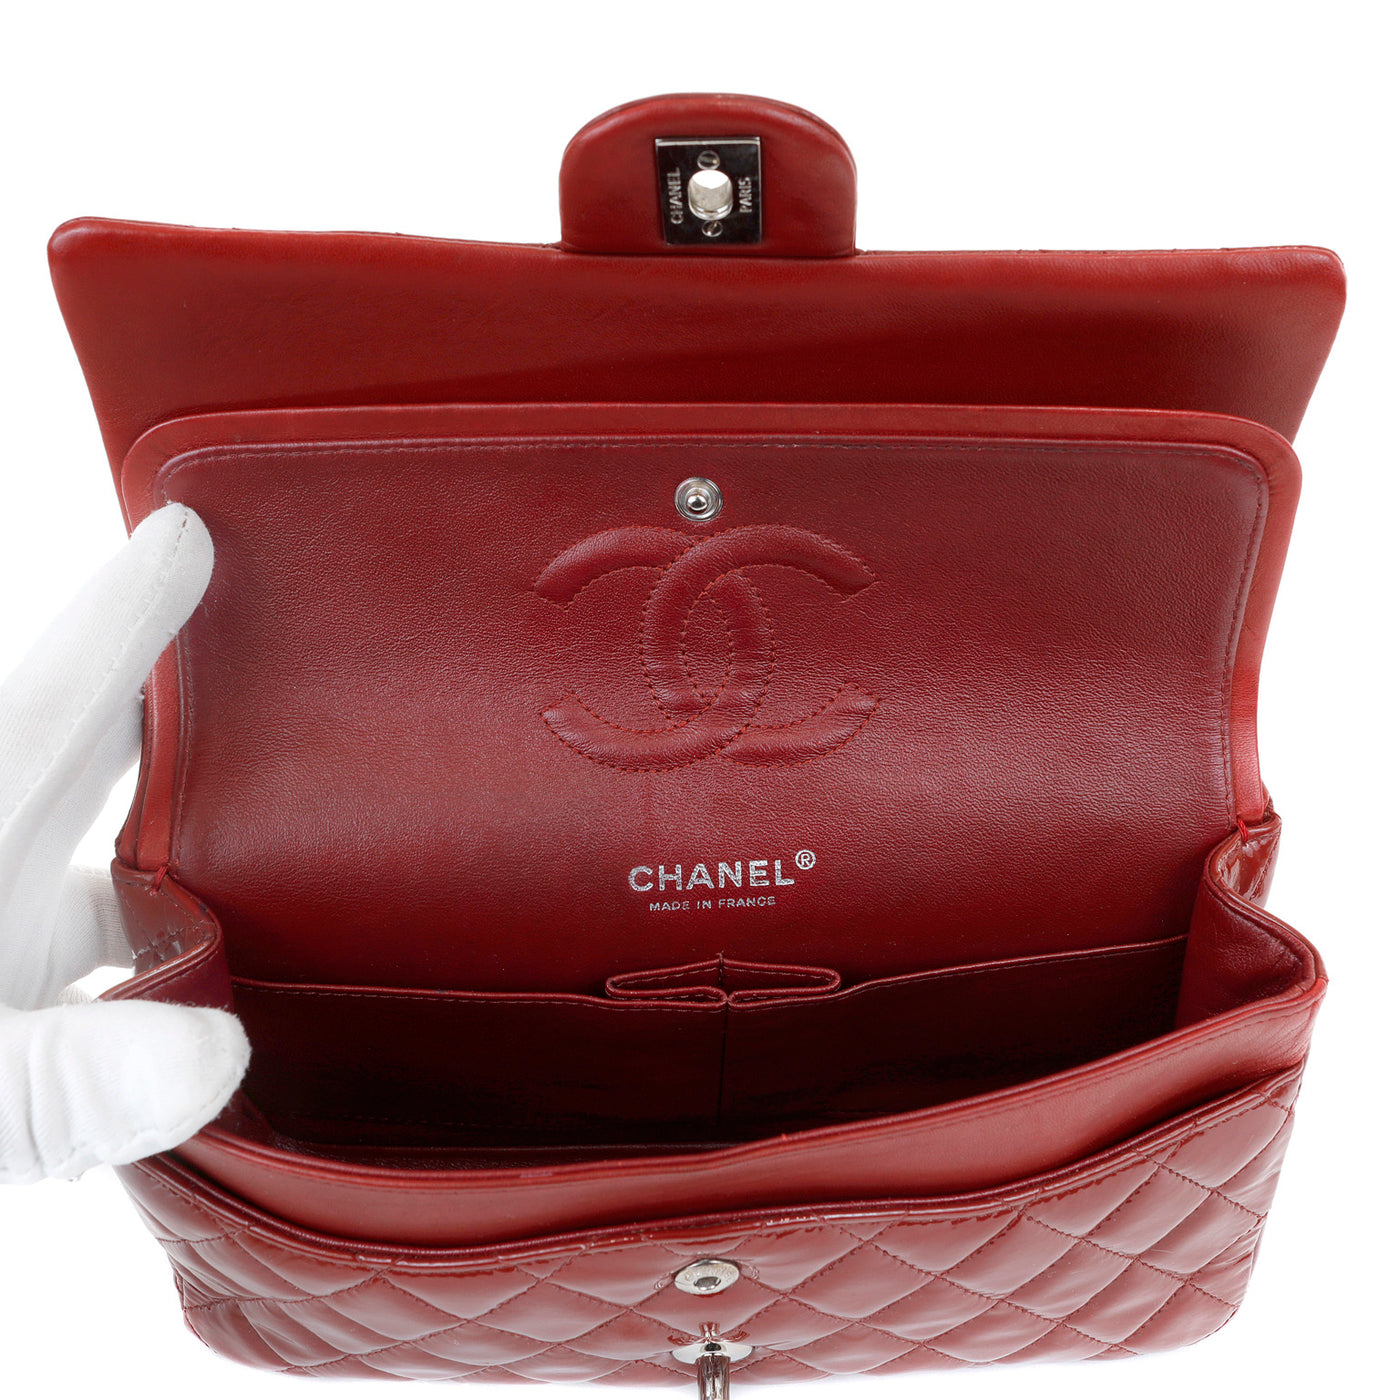 Chanel Dark Red Patent Leather Medium Classic with Silver Hardware